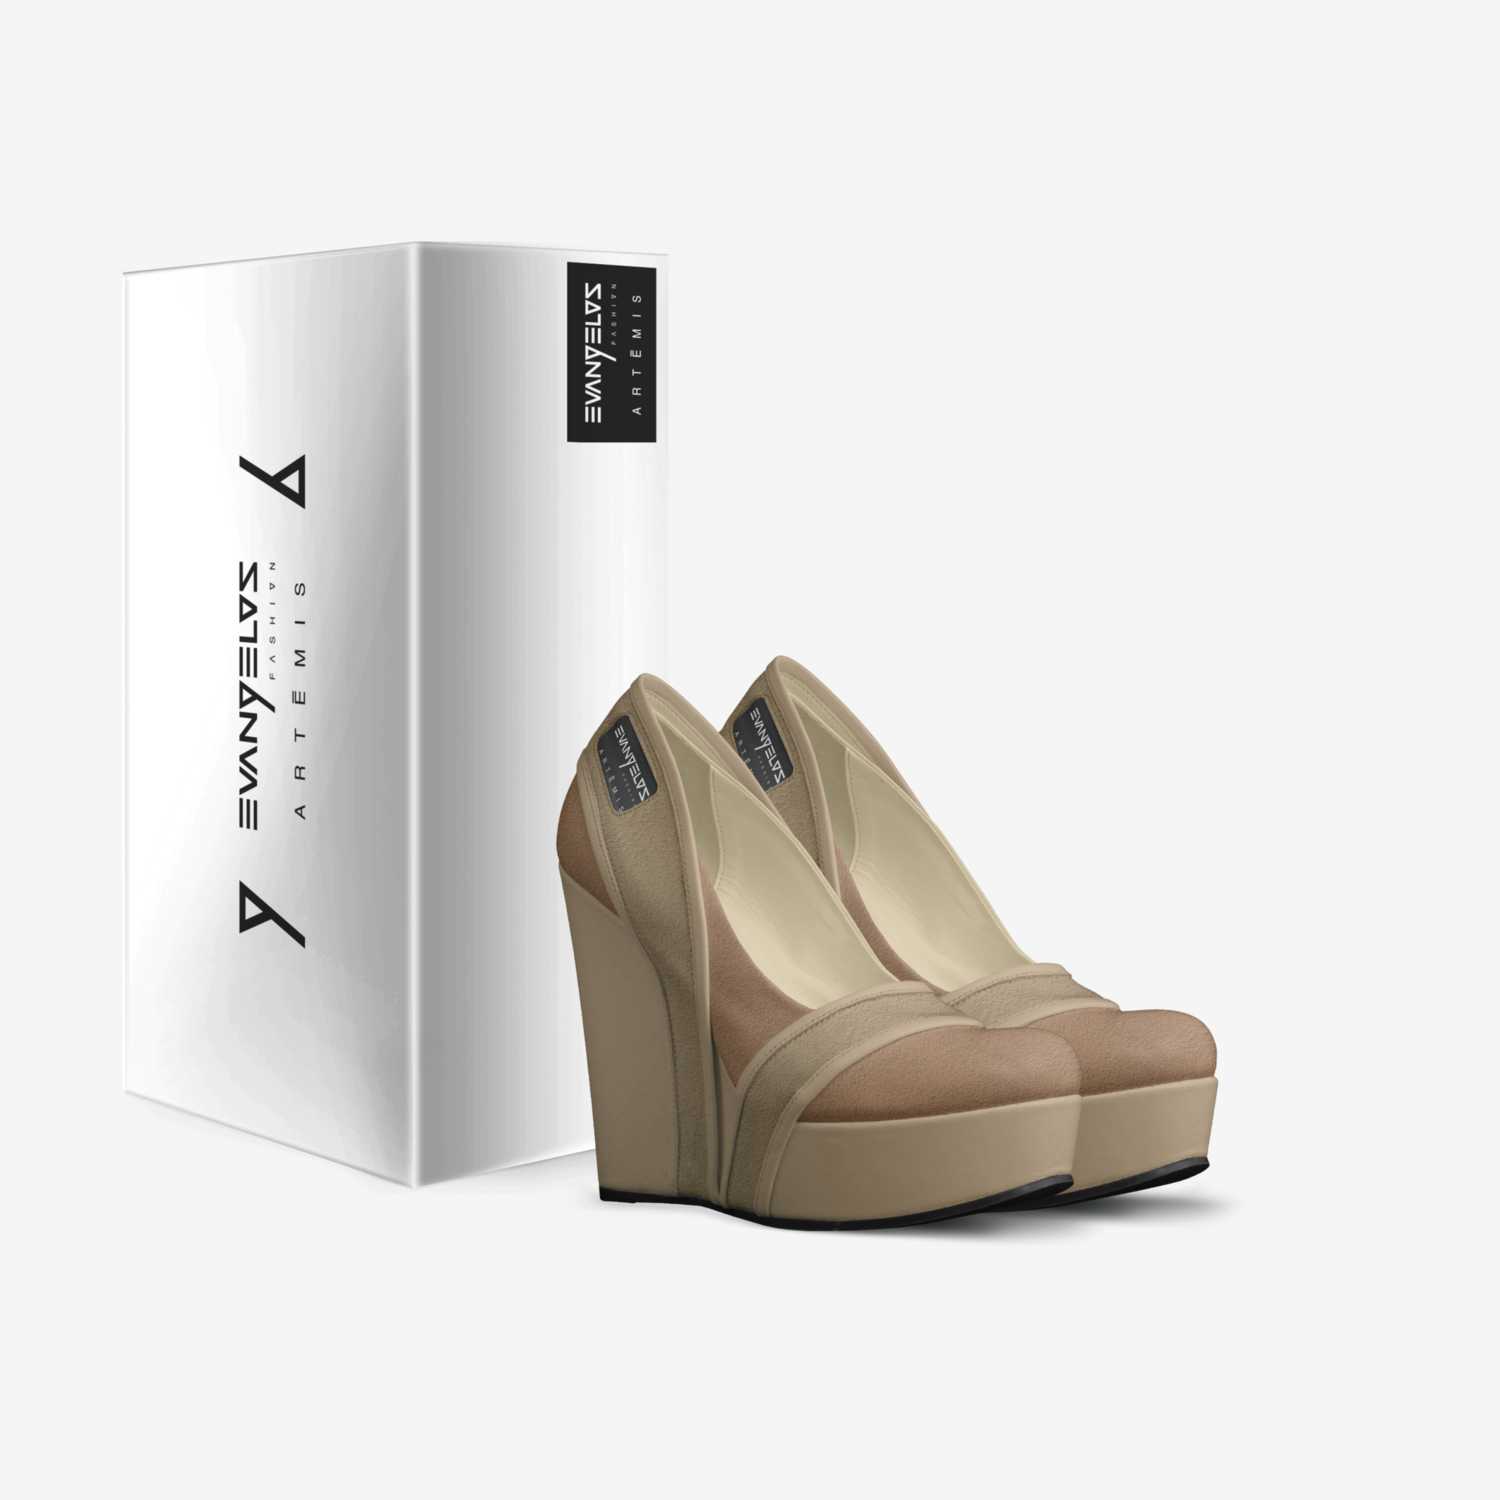 ARTEMIS custom made in Italy shoes by Evangelos Fashion | Box view